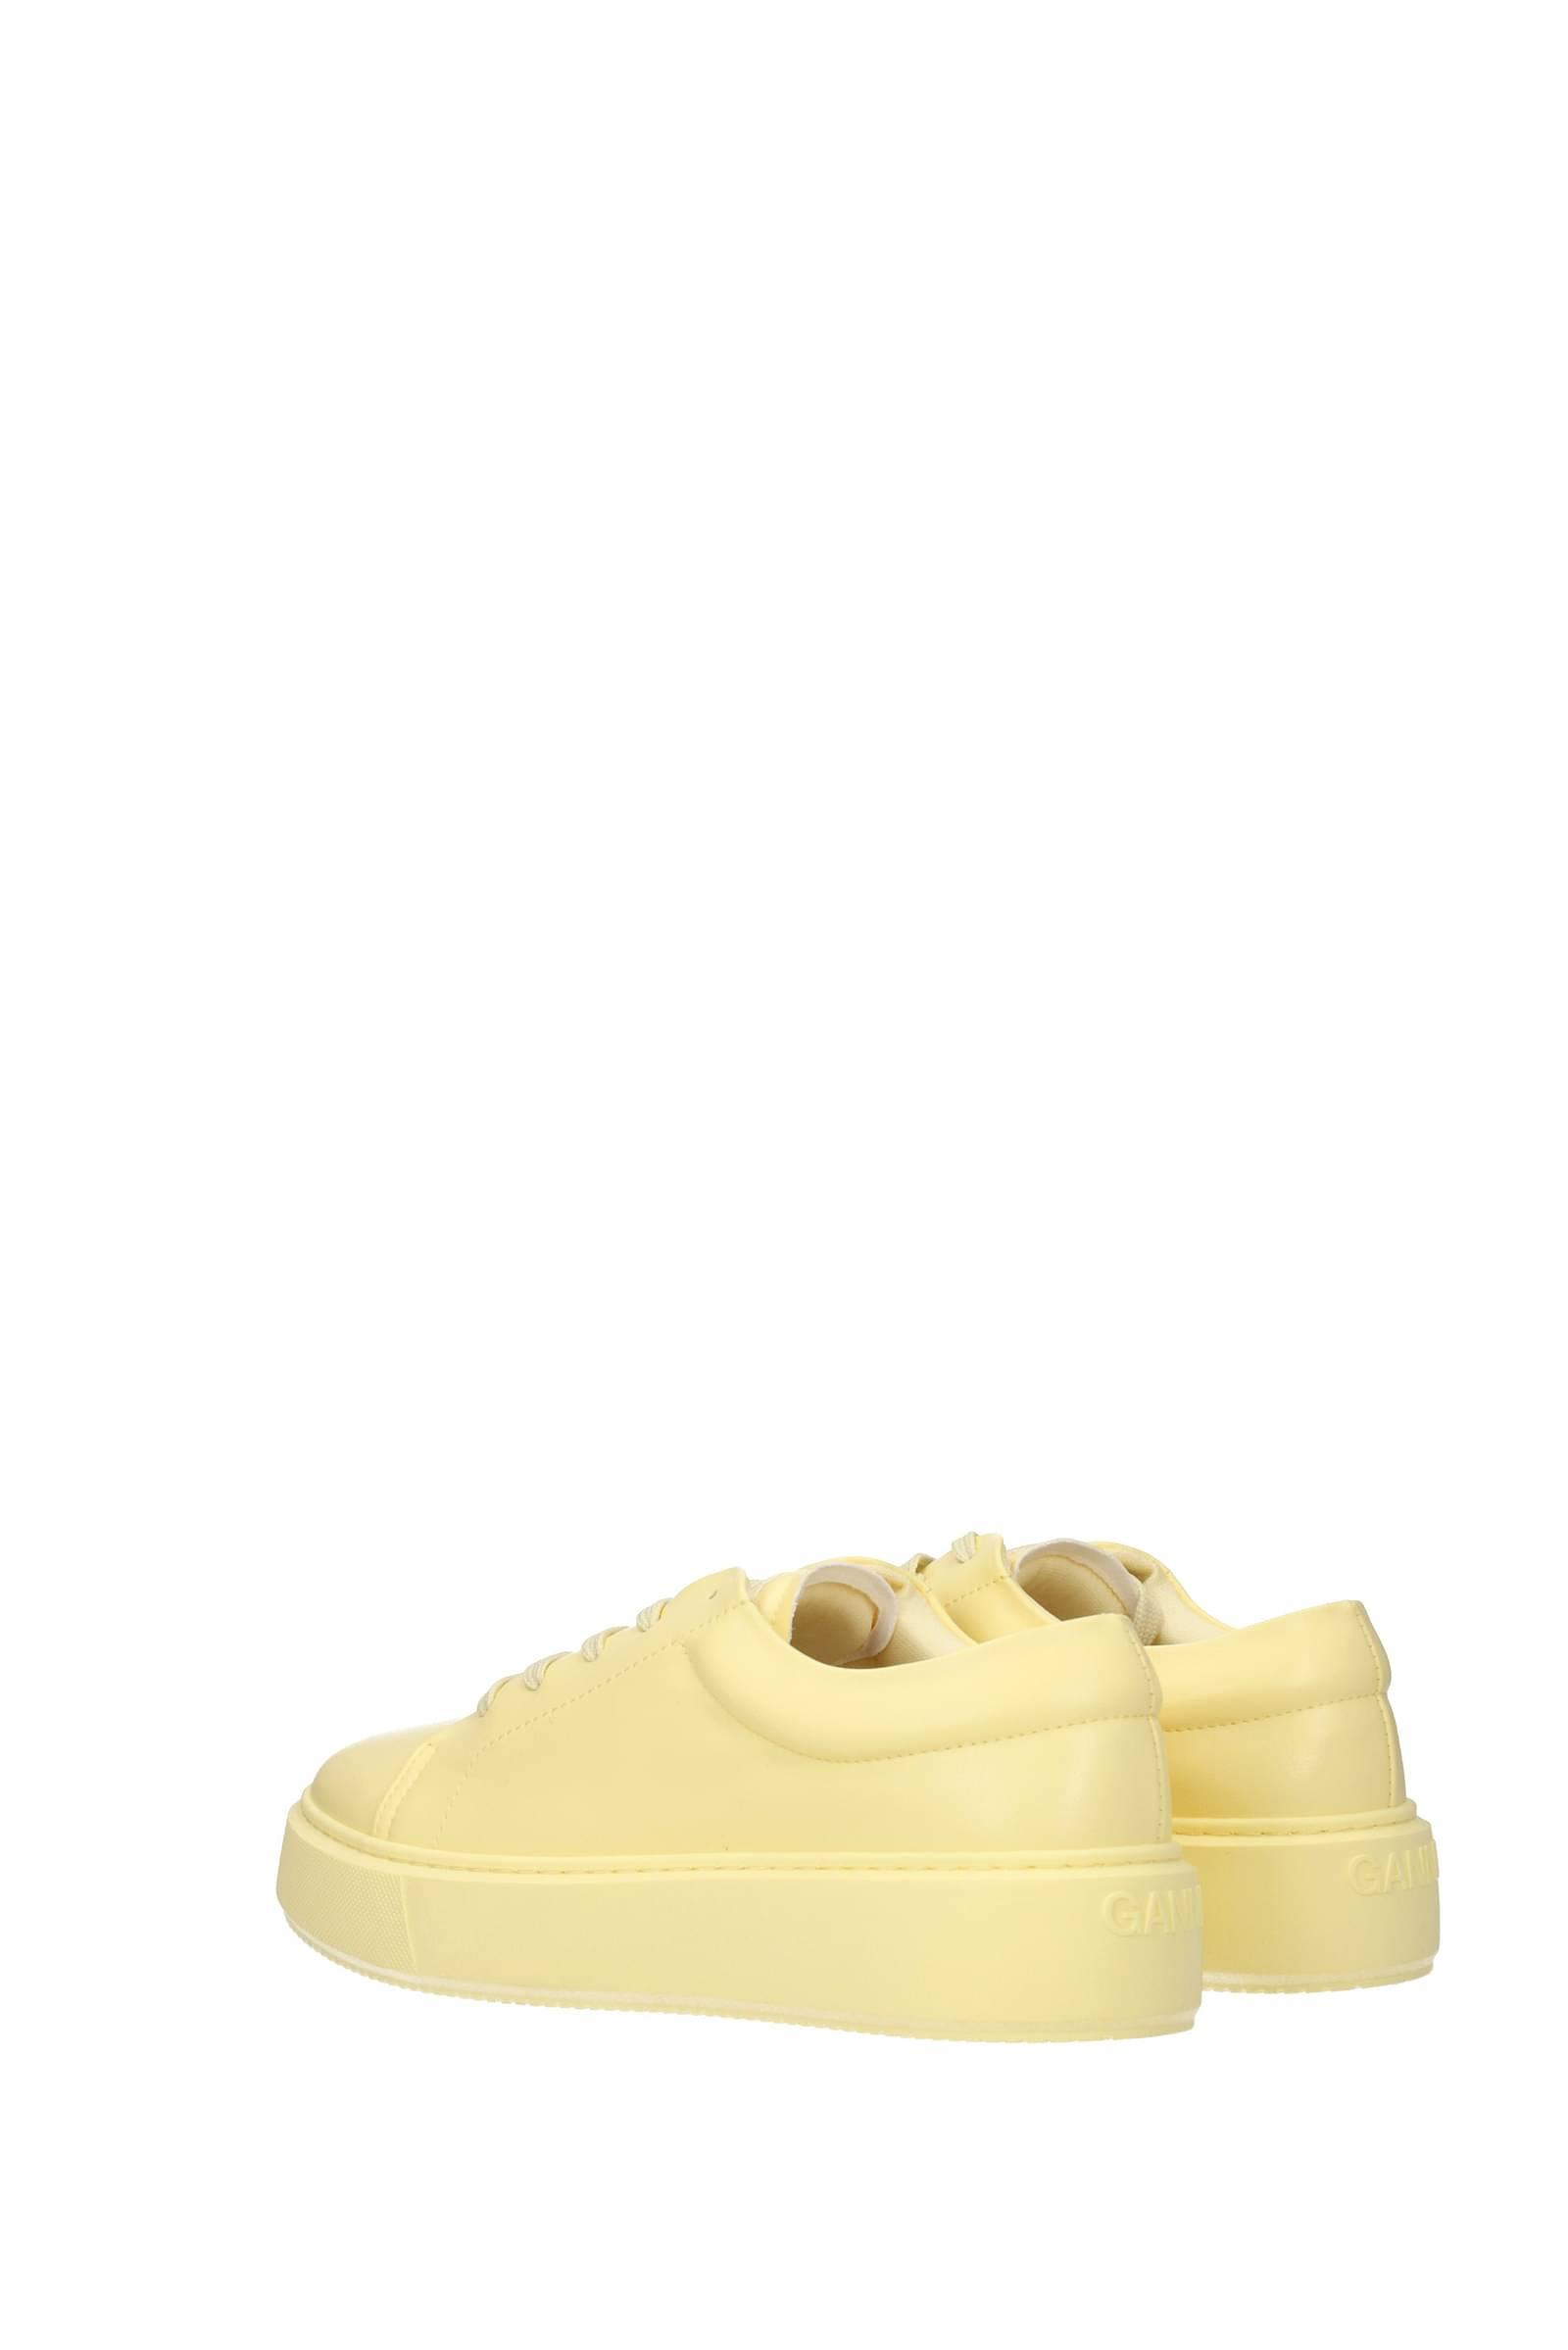 Ganni Sneakers Leather Yellow Banana | Lyst